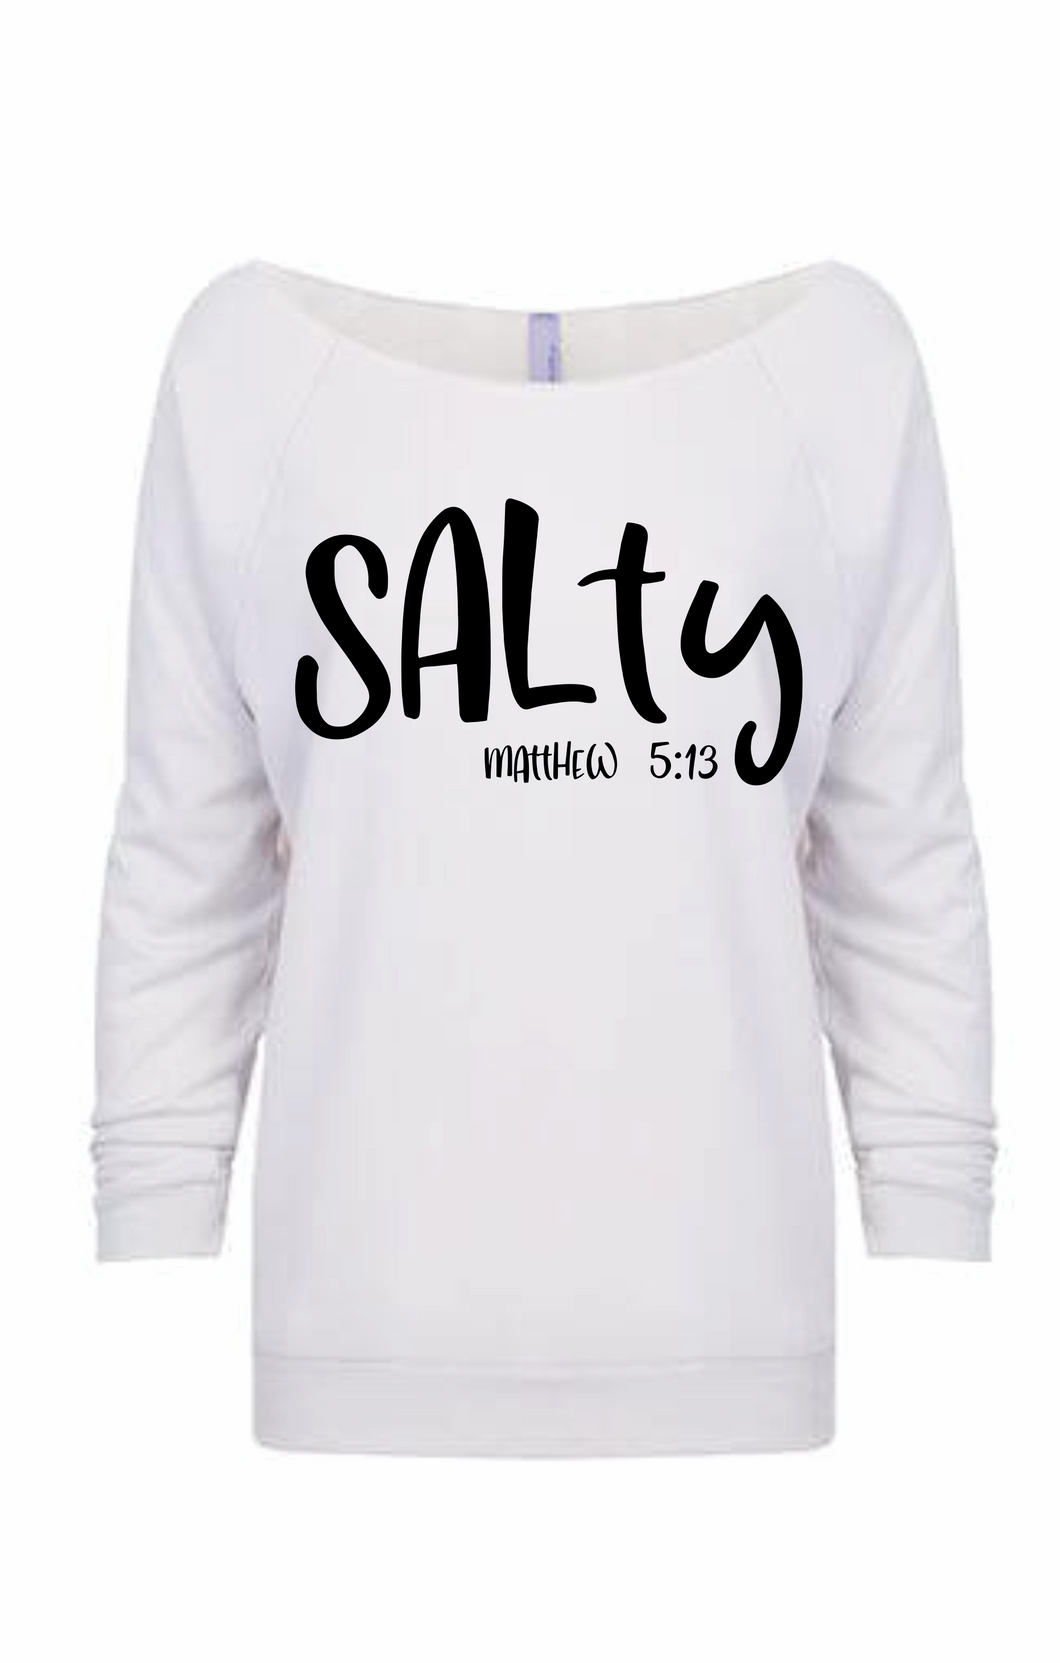 Salty Matthew 5:13 You are the salt of the earth